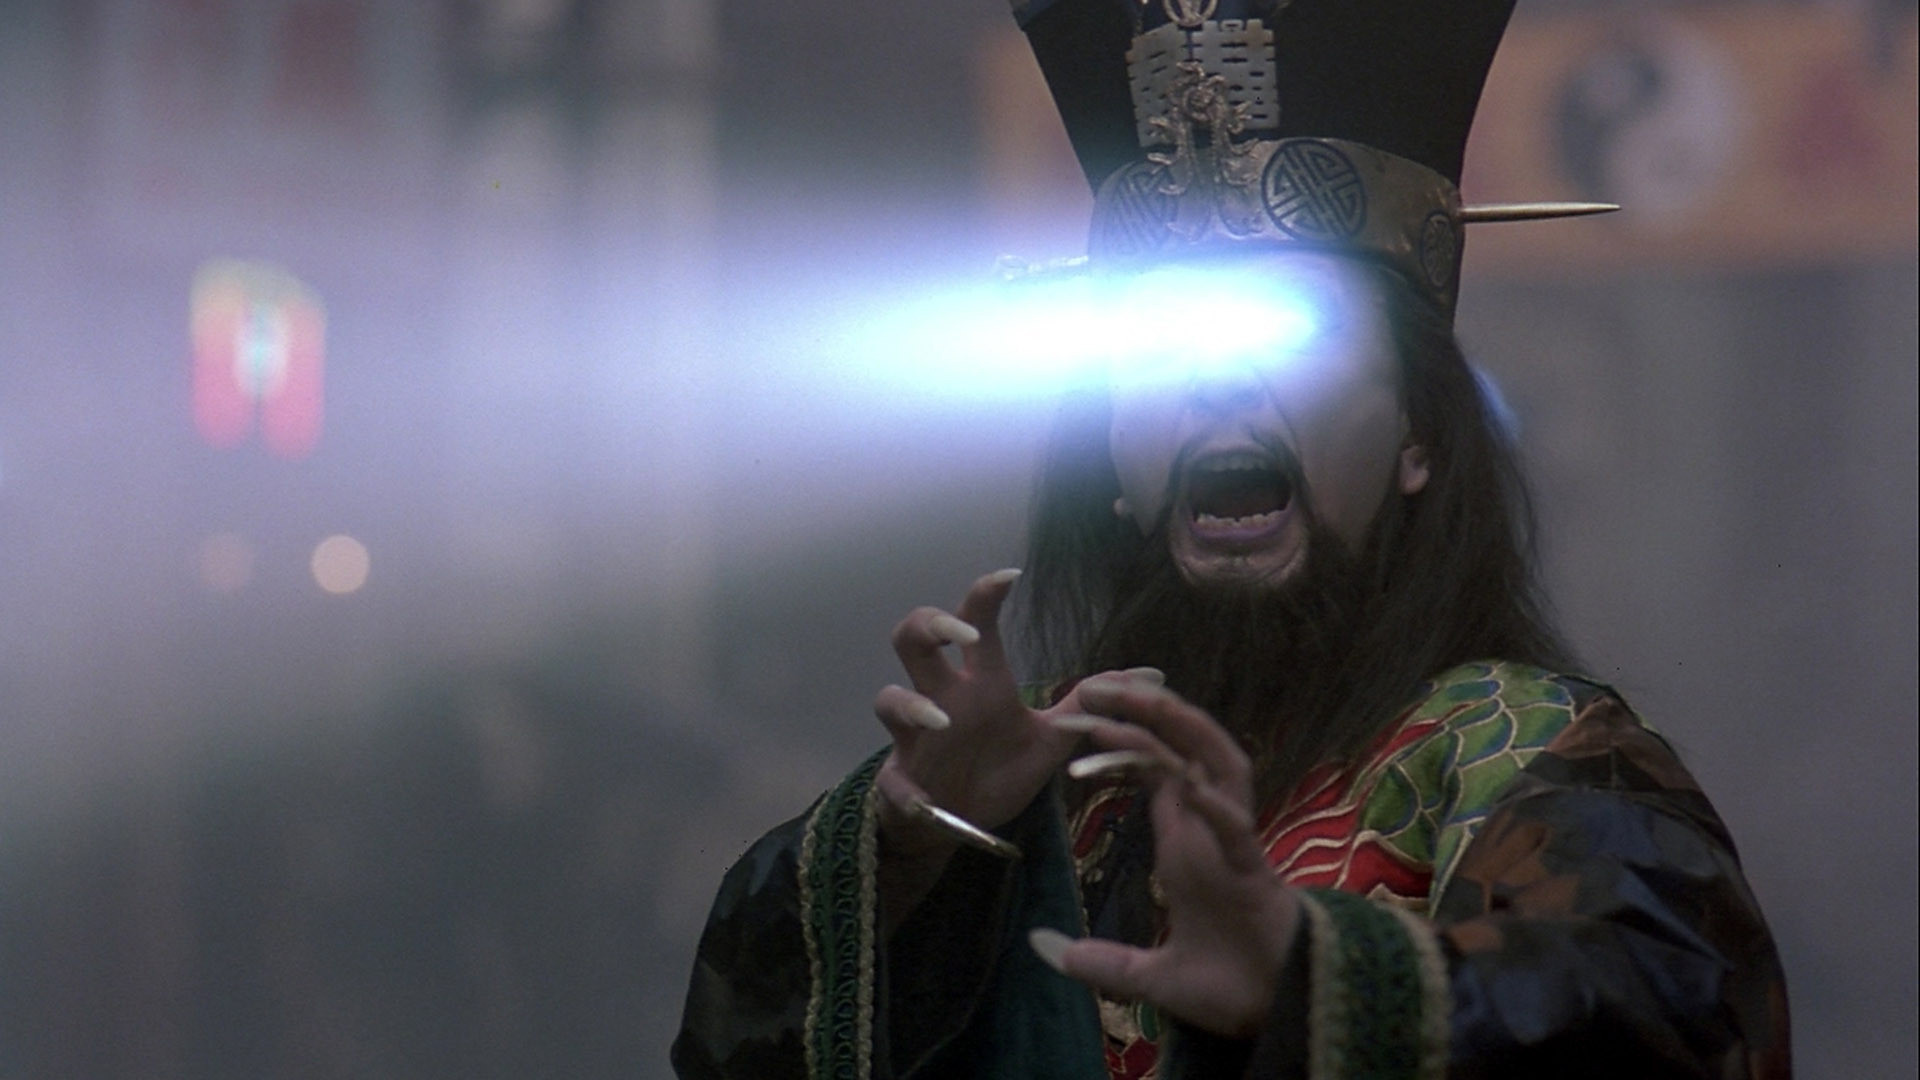 Movie Big Trouble In Little China 1920x1080